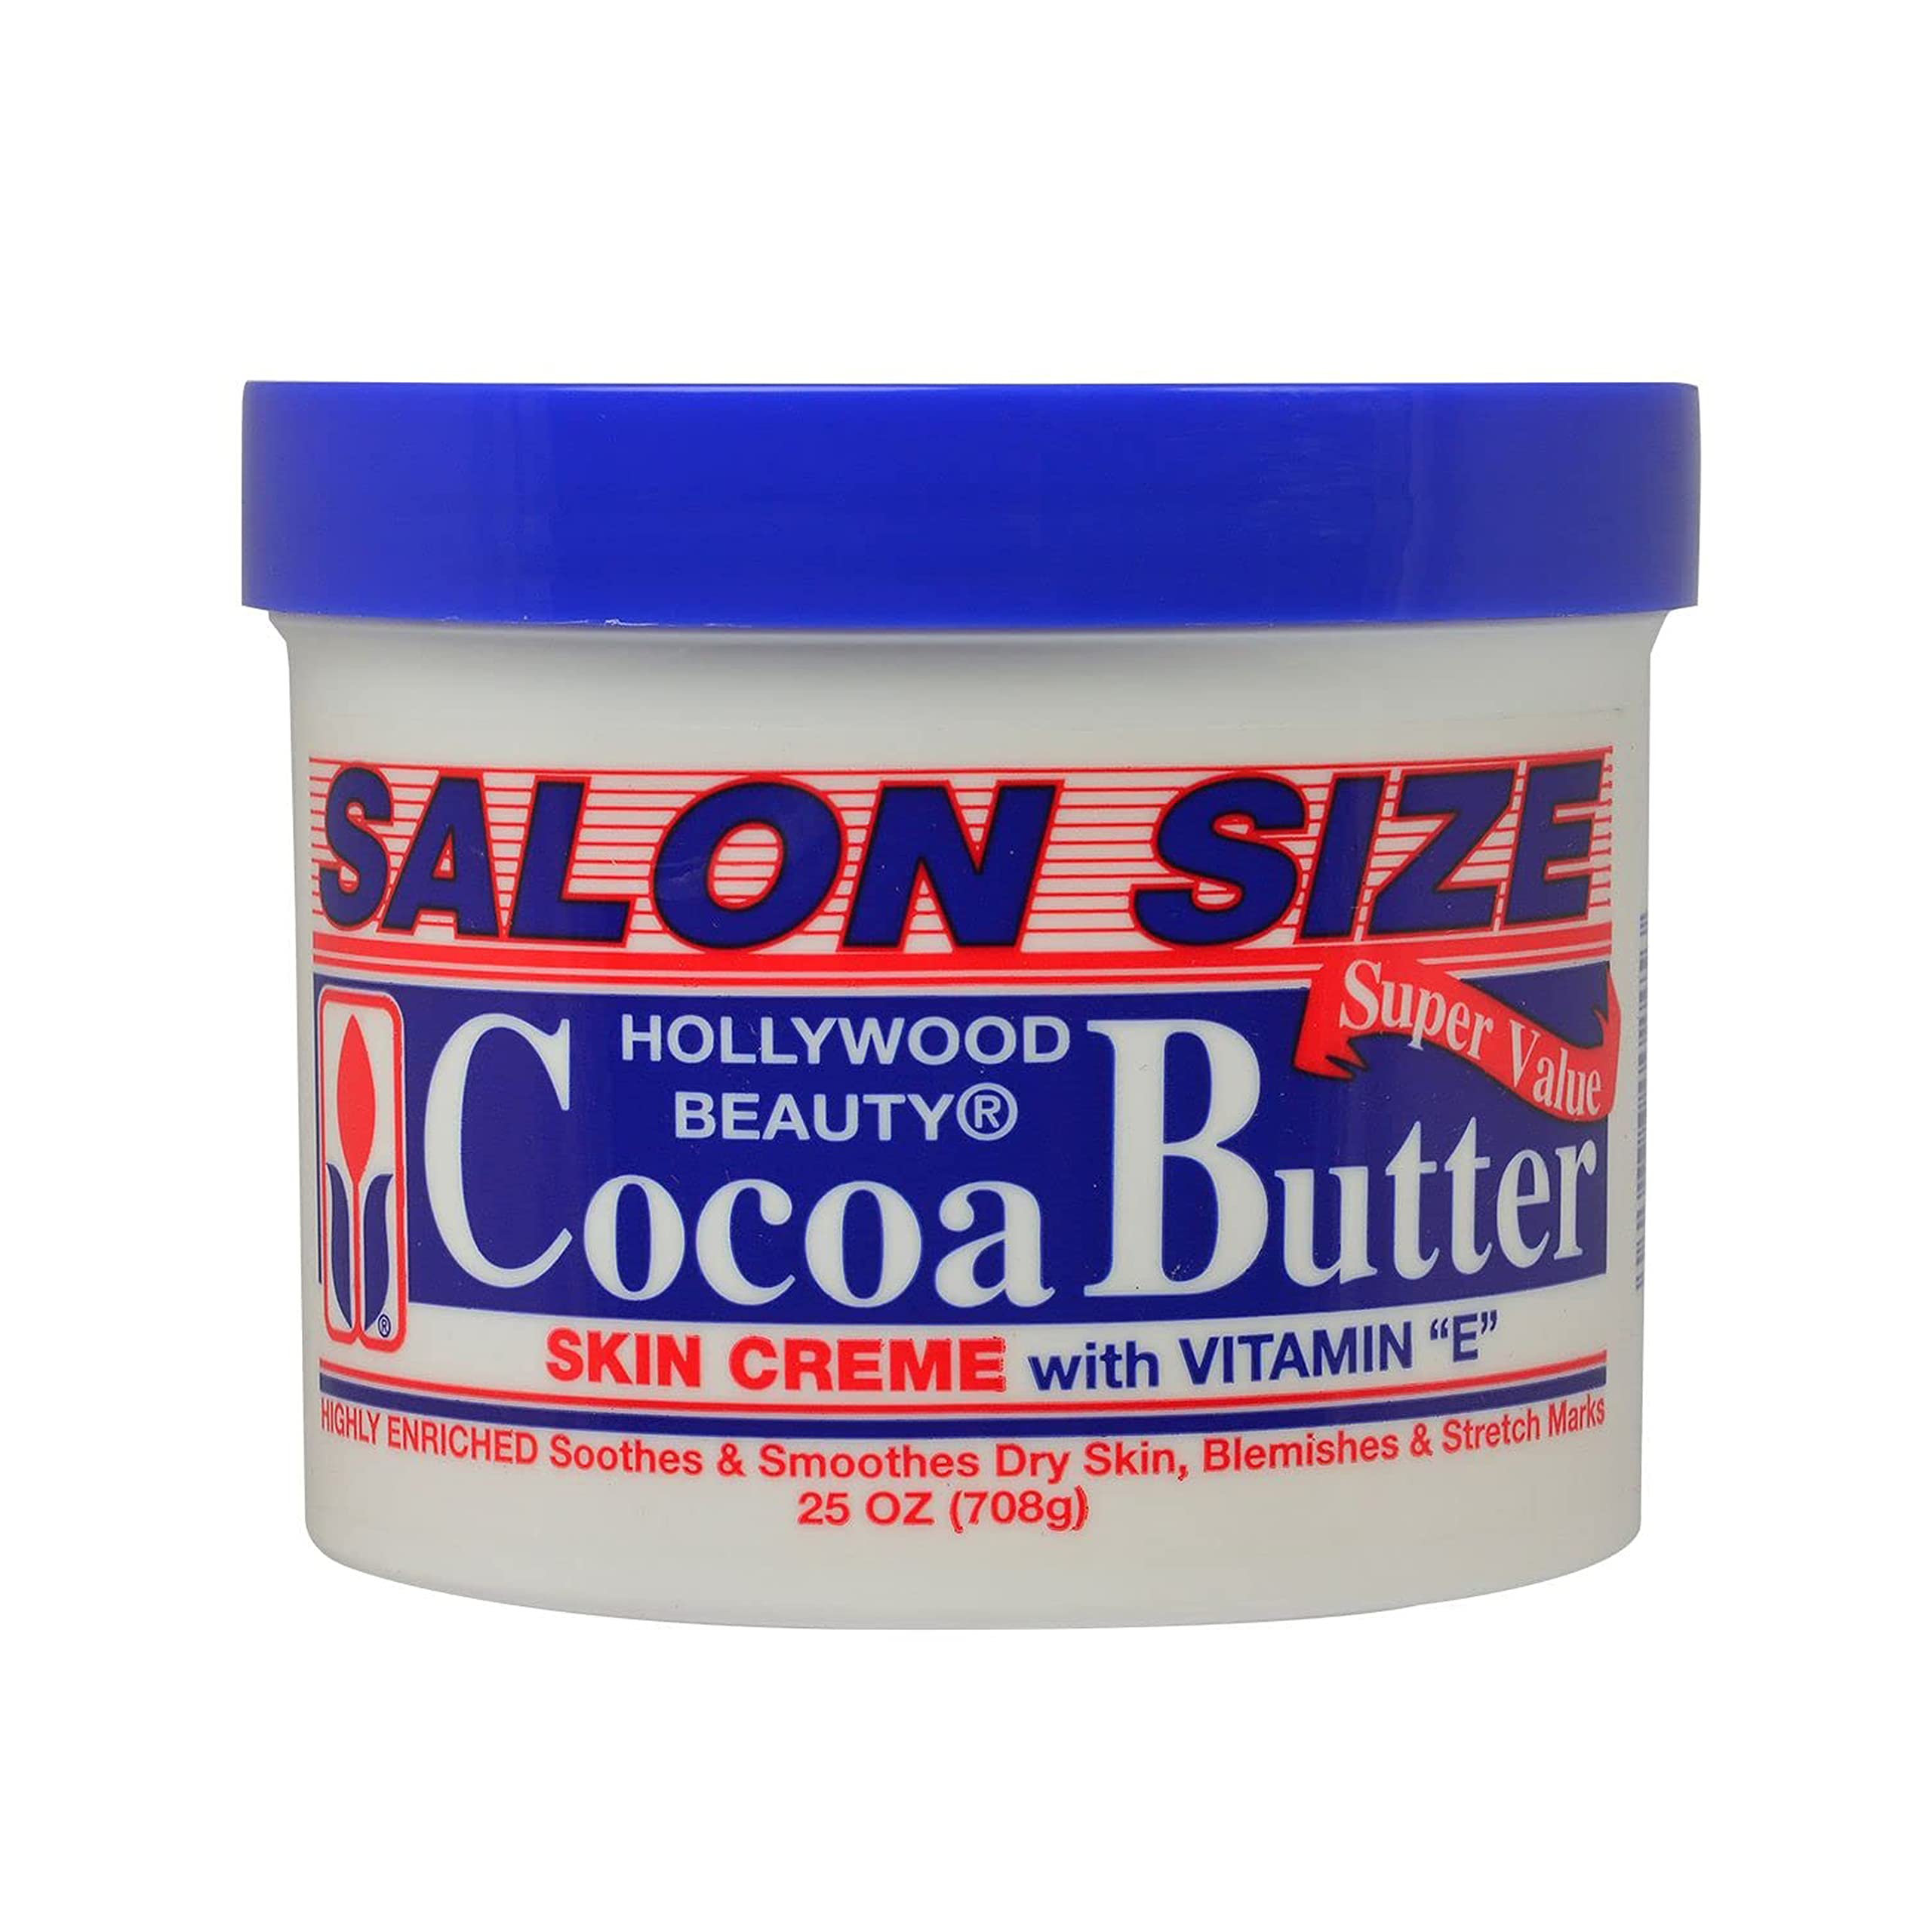 Hollywood Beauty Cocoa Butter Skin Crème 708 g/25 oz